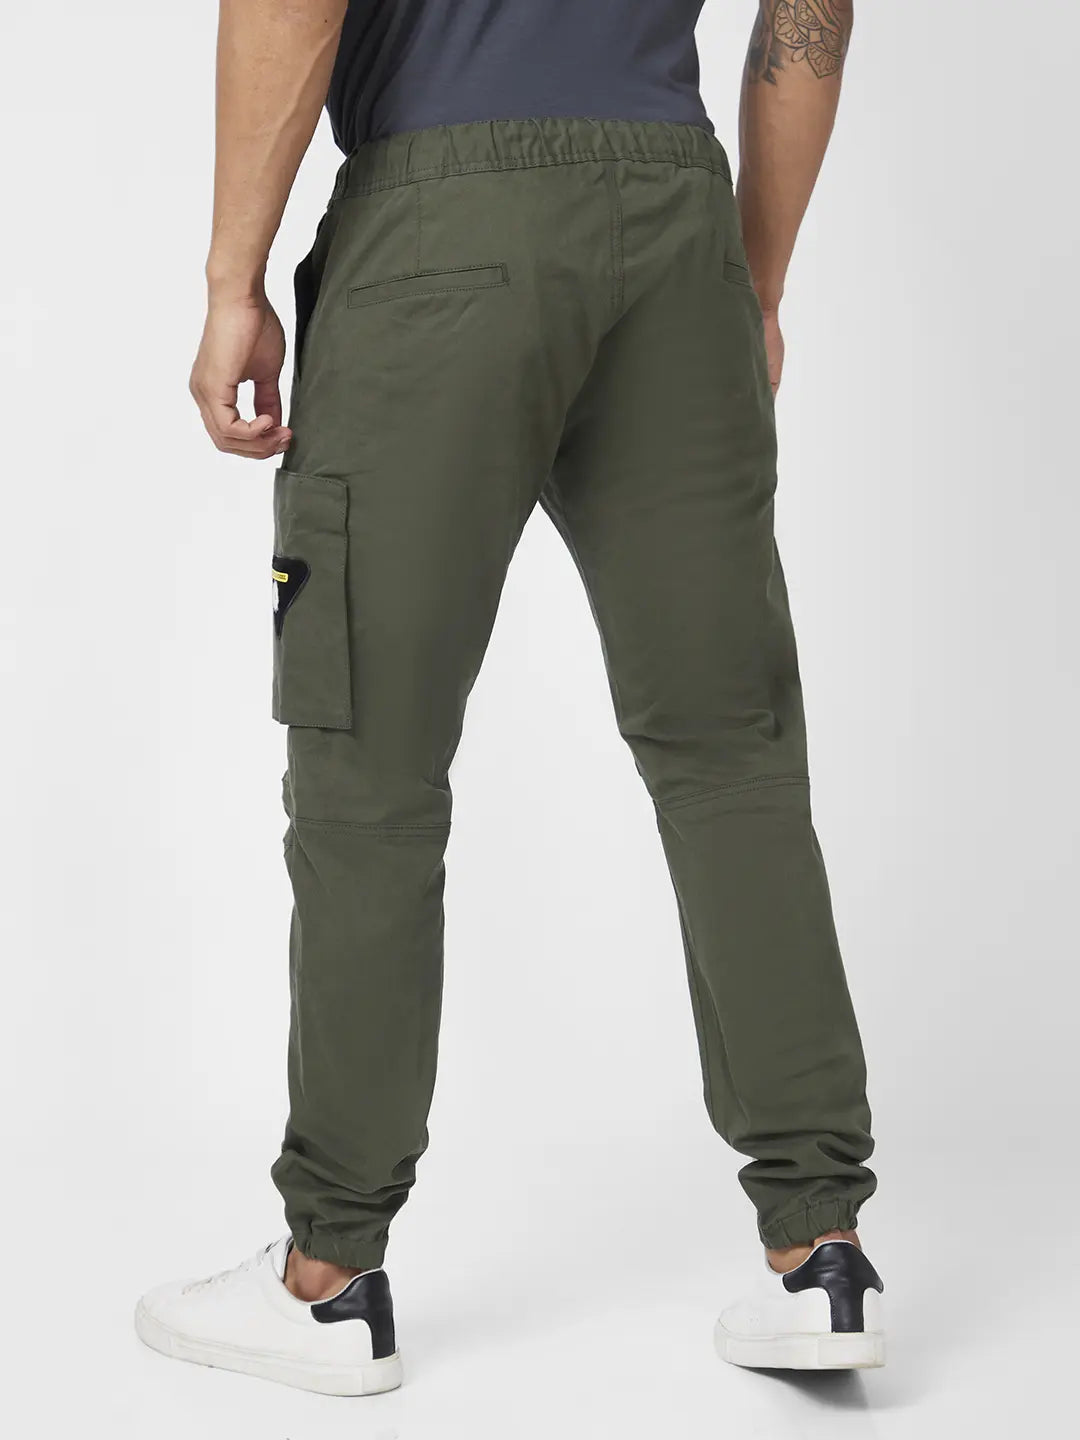 RQYYD Men's Cargo Pants with Multi-Pockets Cotton Sweatpants Casual  Athletic Jogger Work Sports Outdoor Trousers(Army Green,XXL) - Walmart.com